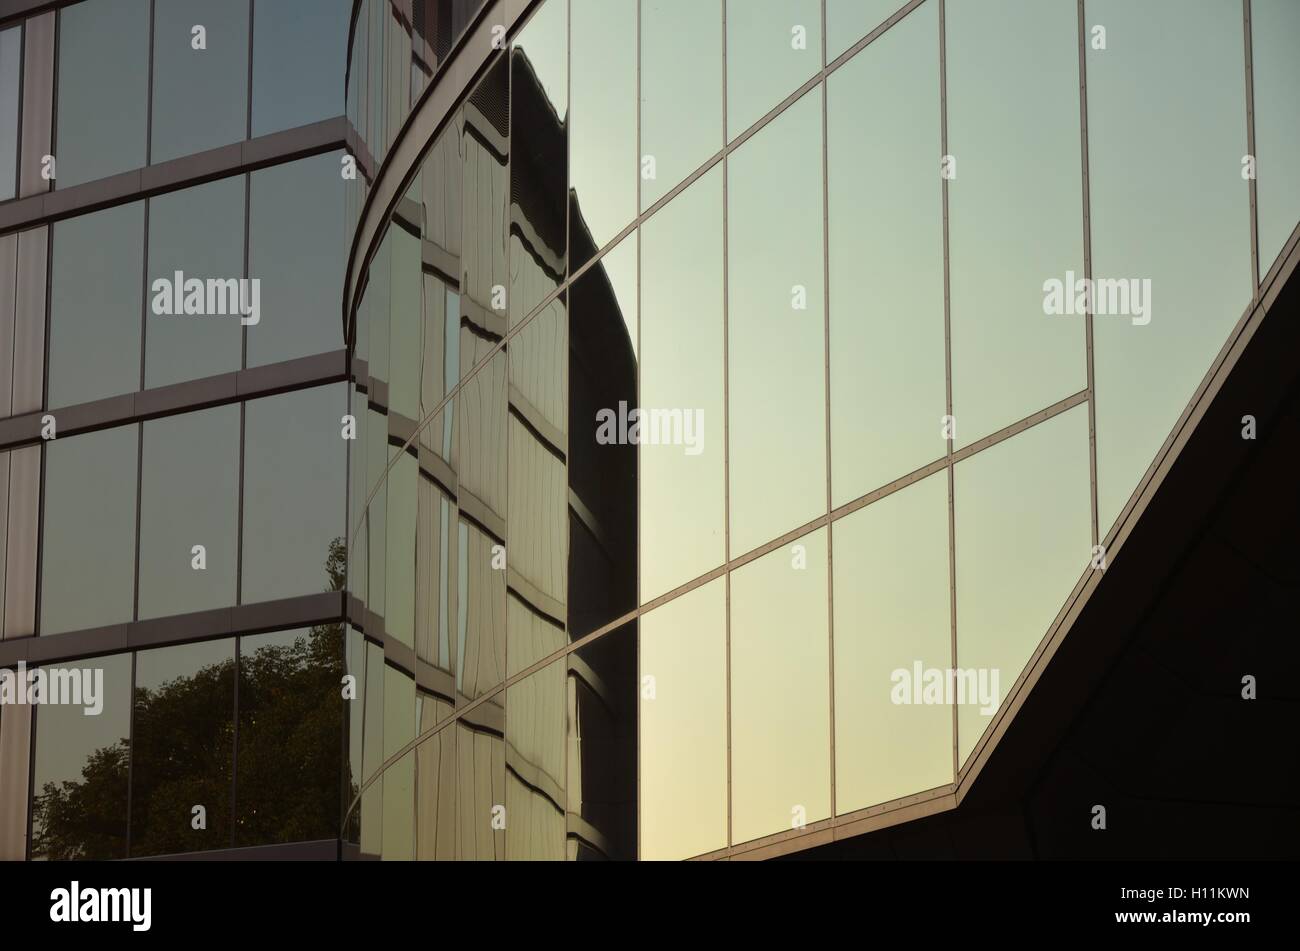 Dark modern glass facade with reflections Stock Photo